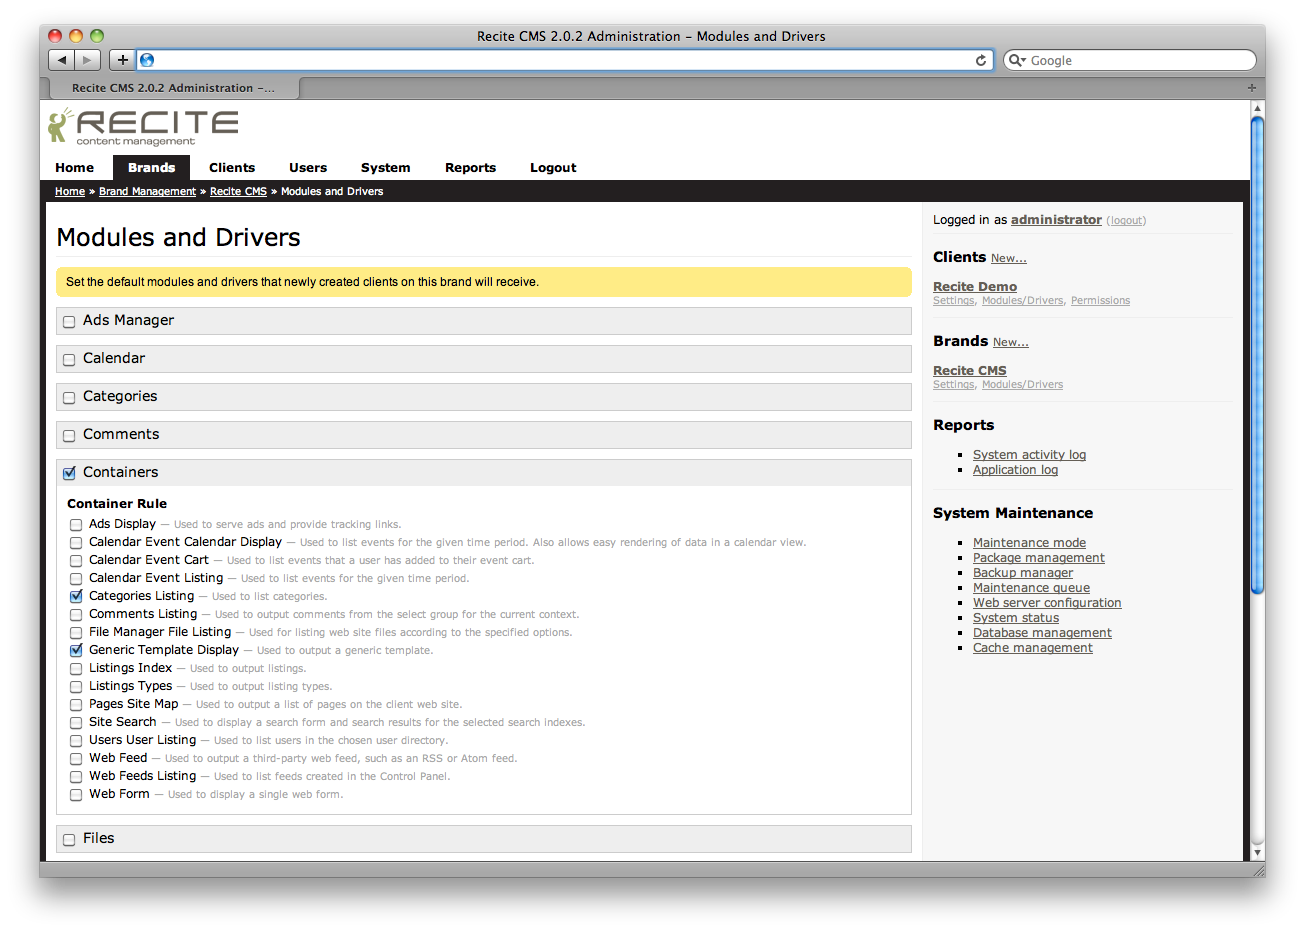 The brand default modules and drivers page.